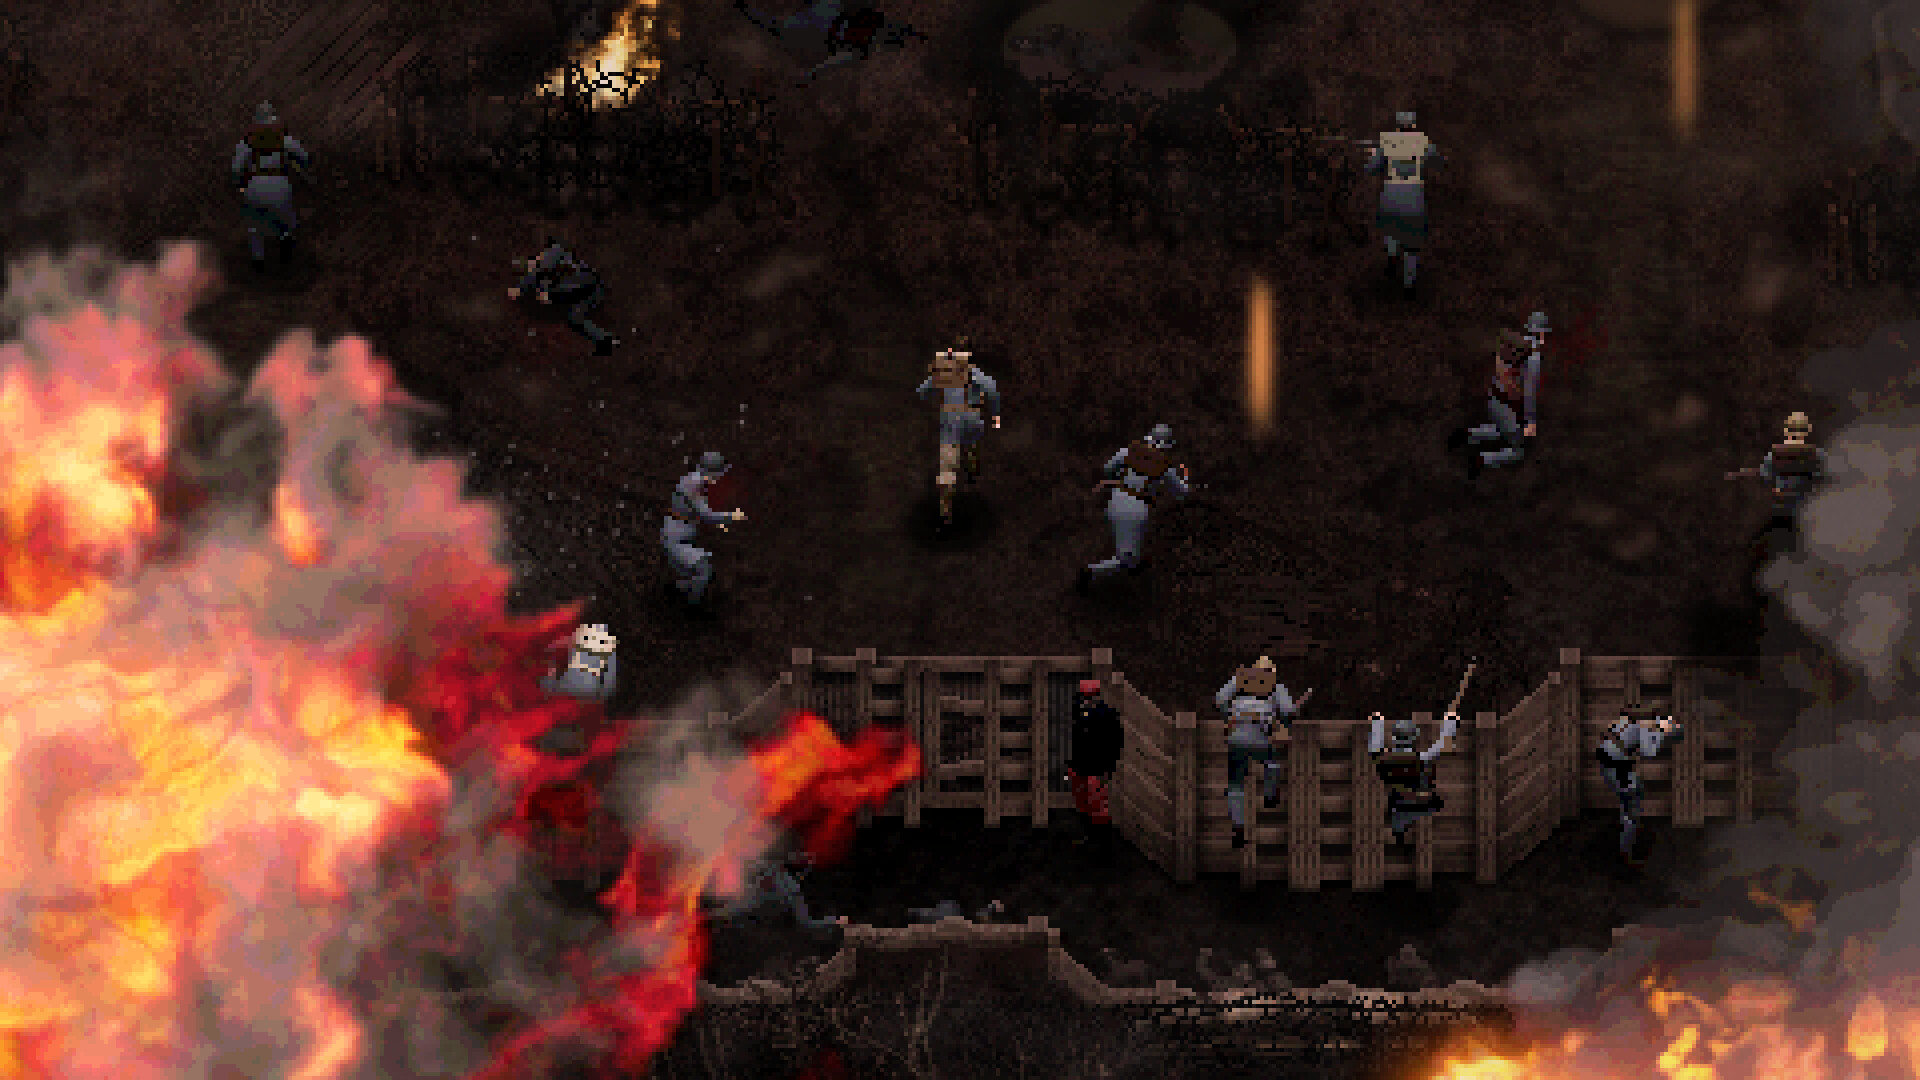 Conscript Steam horror game: Soldiers fighting one another in Steam horror game Conscript